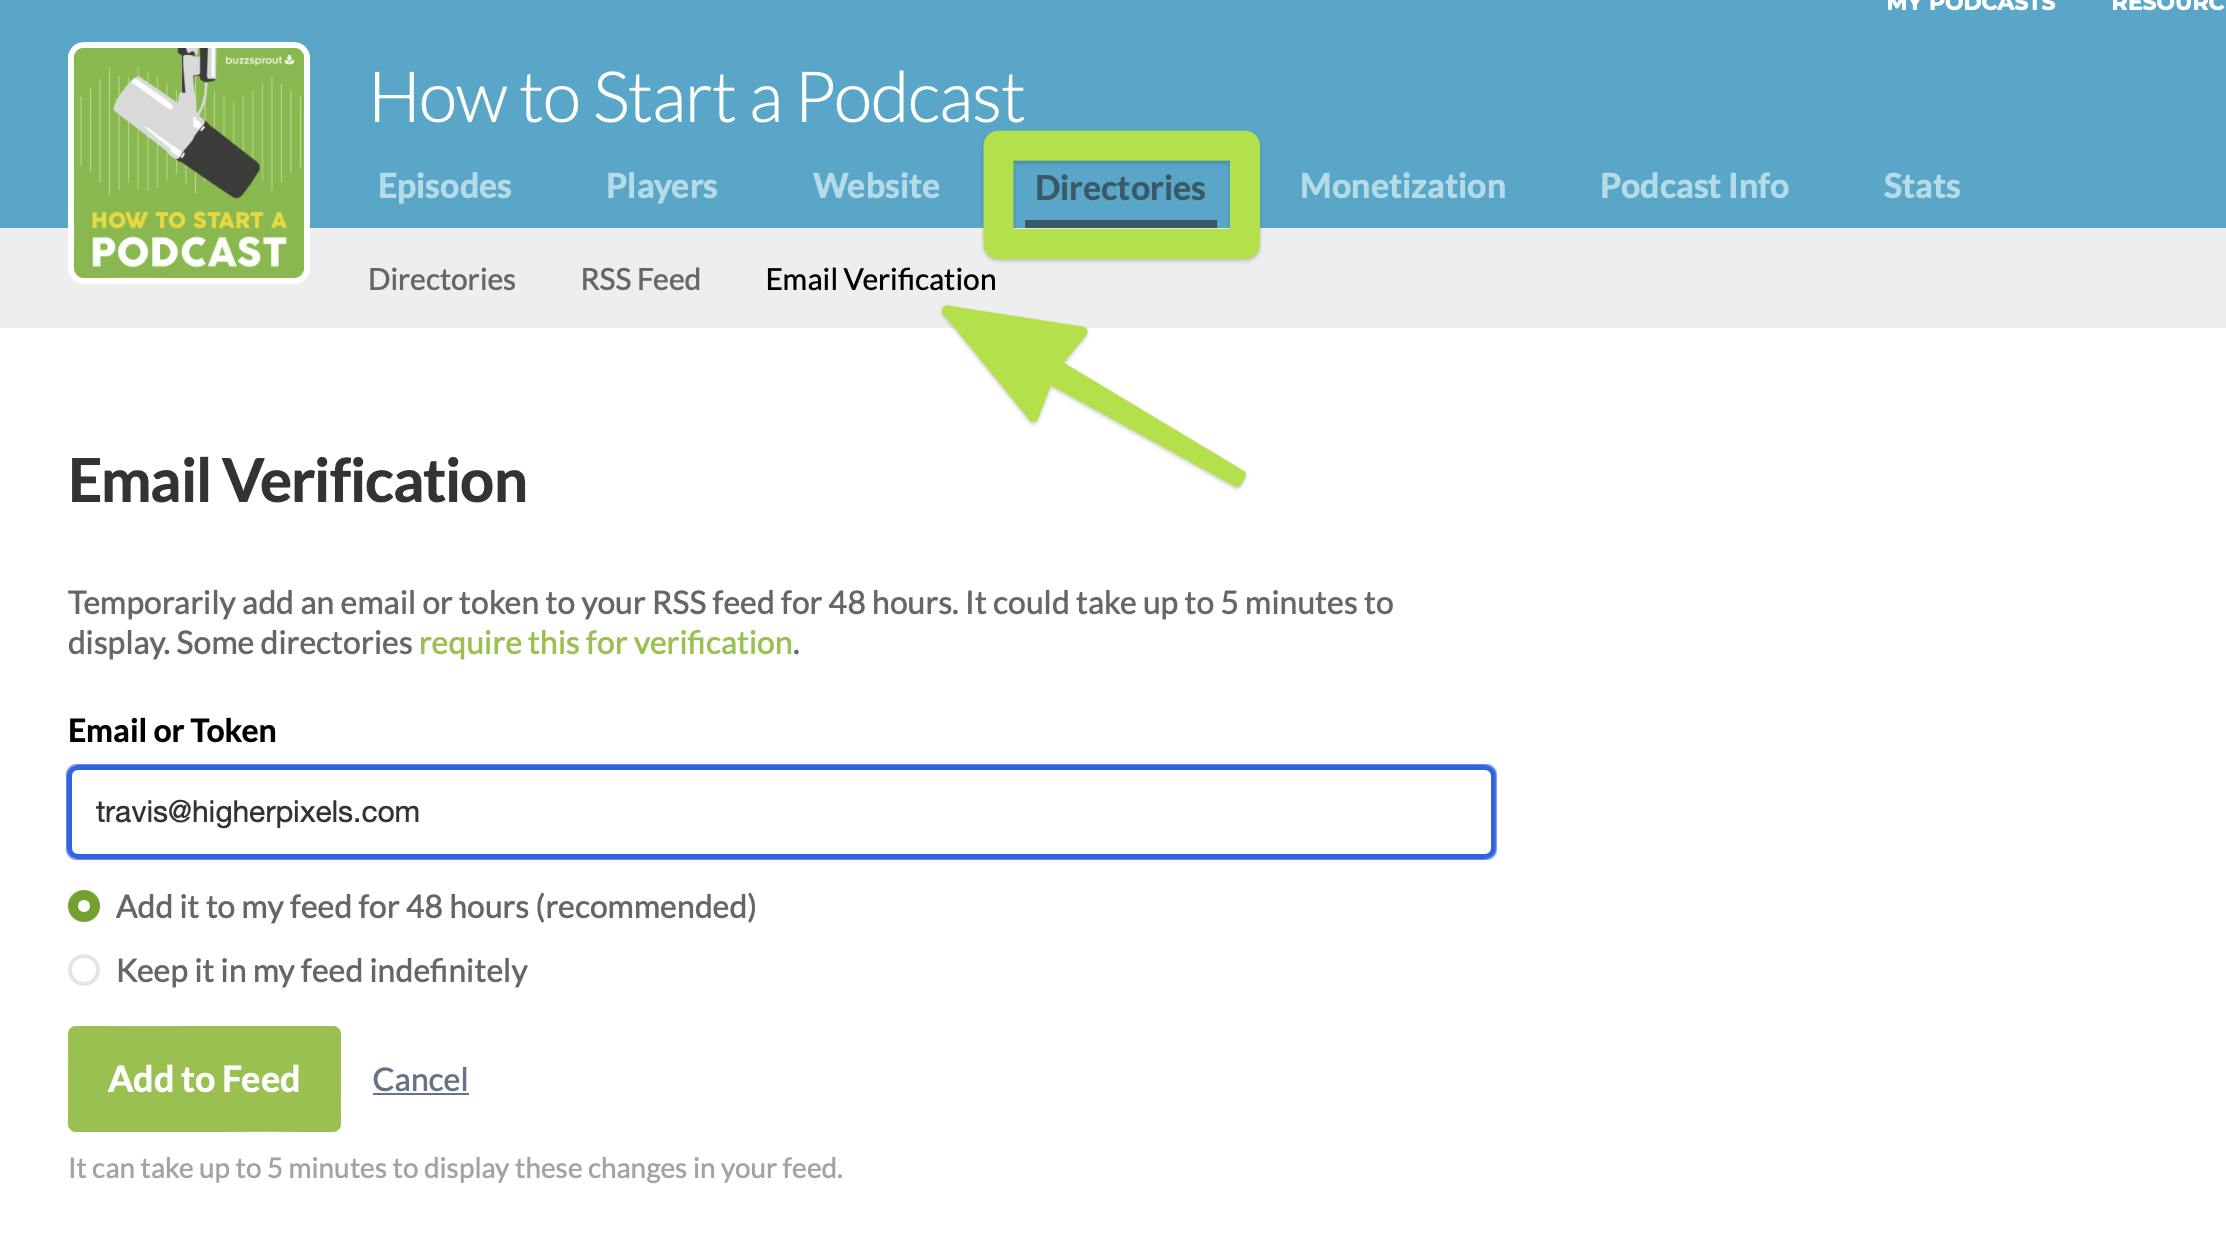 How to upload a podcast to Spotify in 4 easy steps